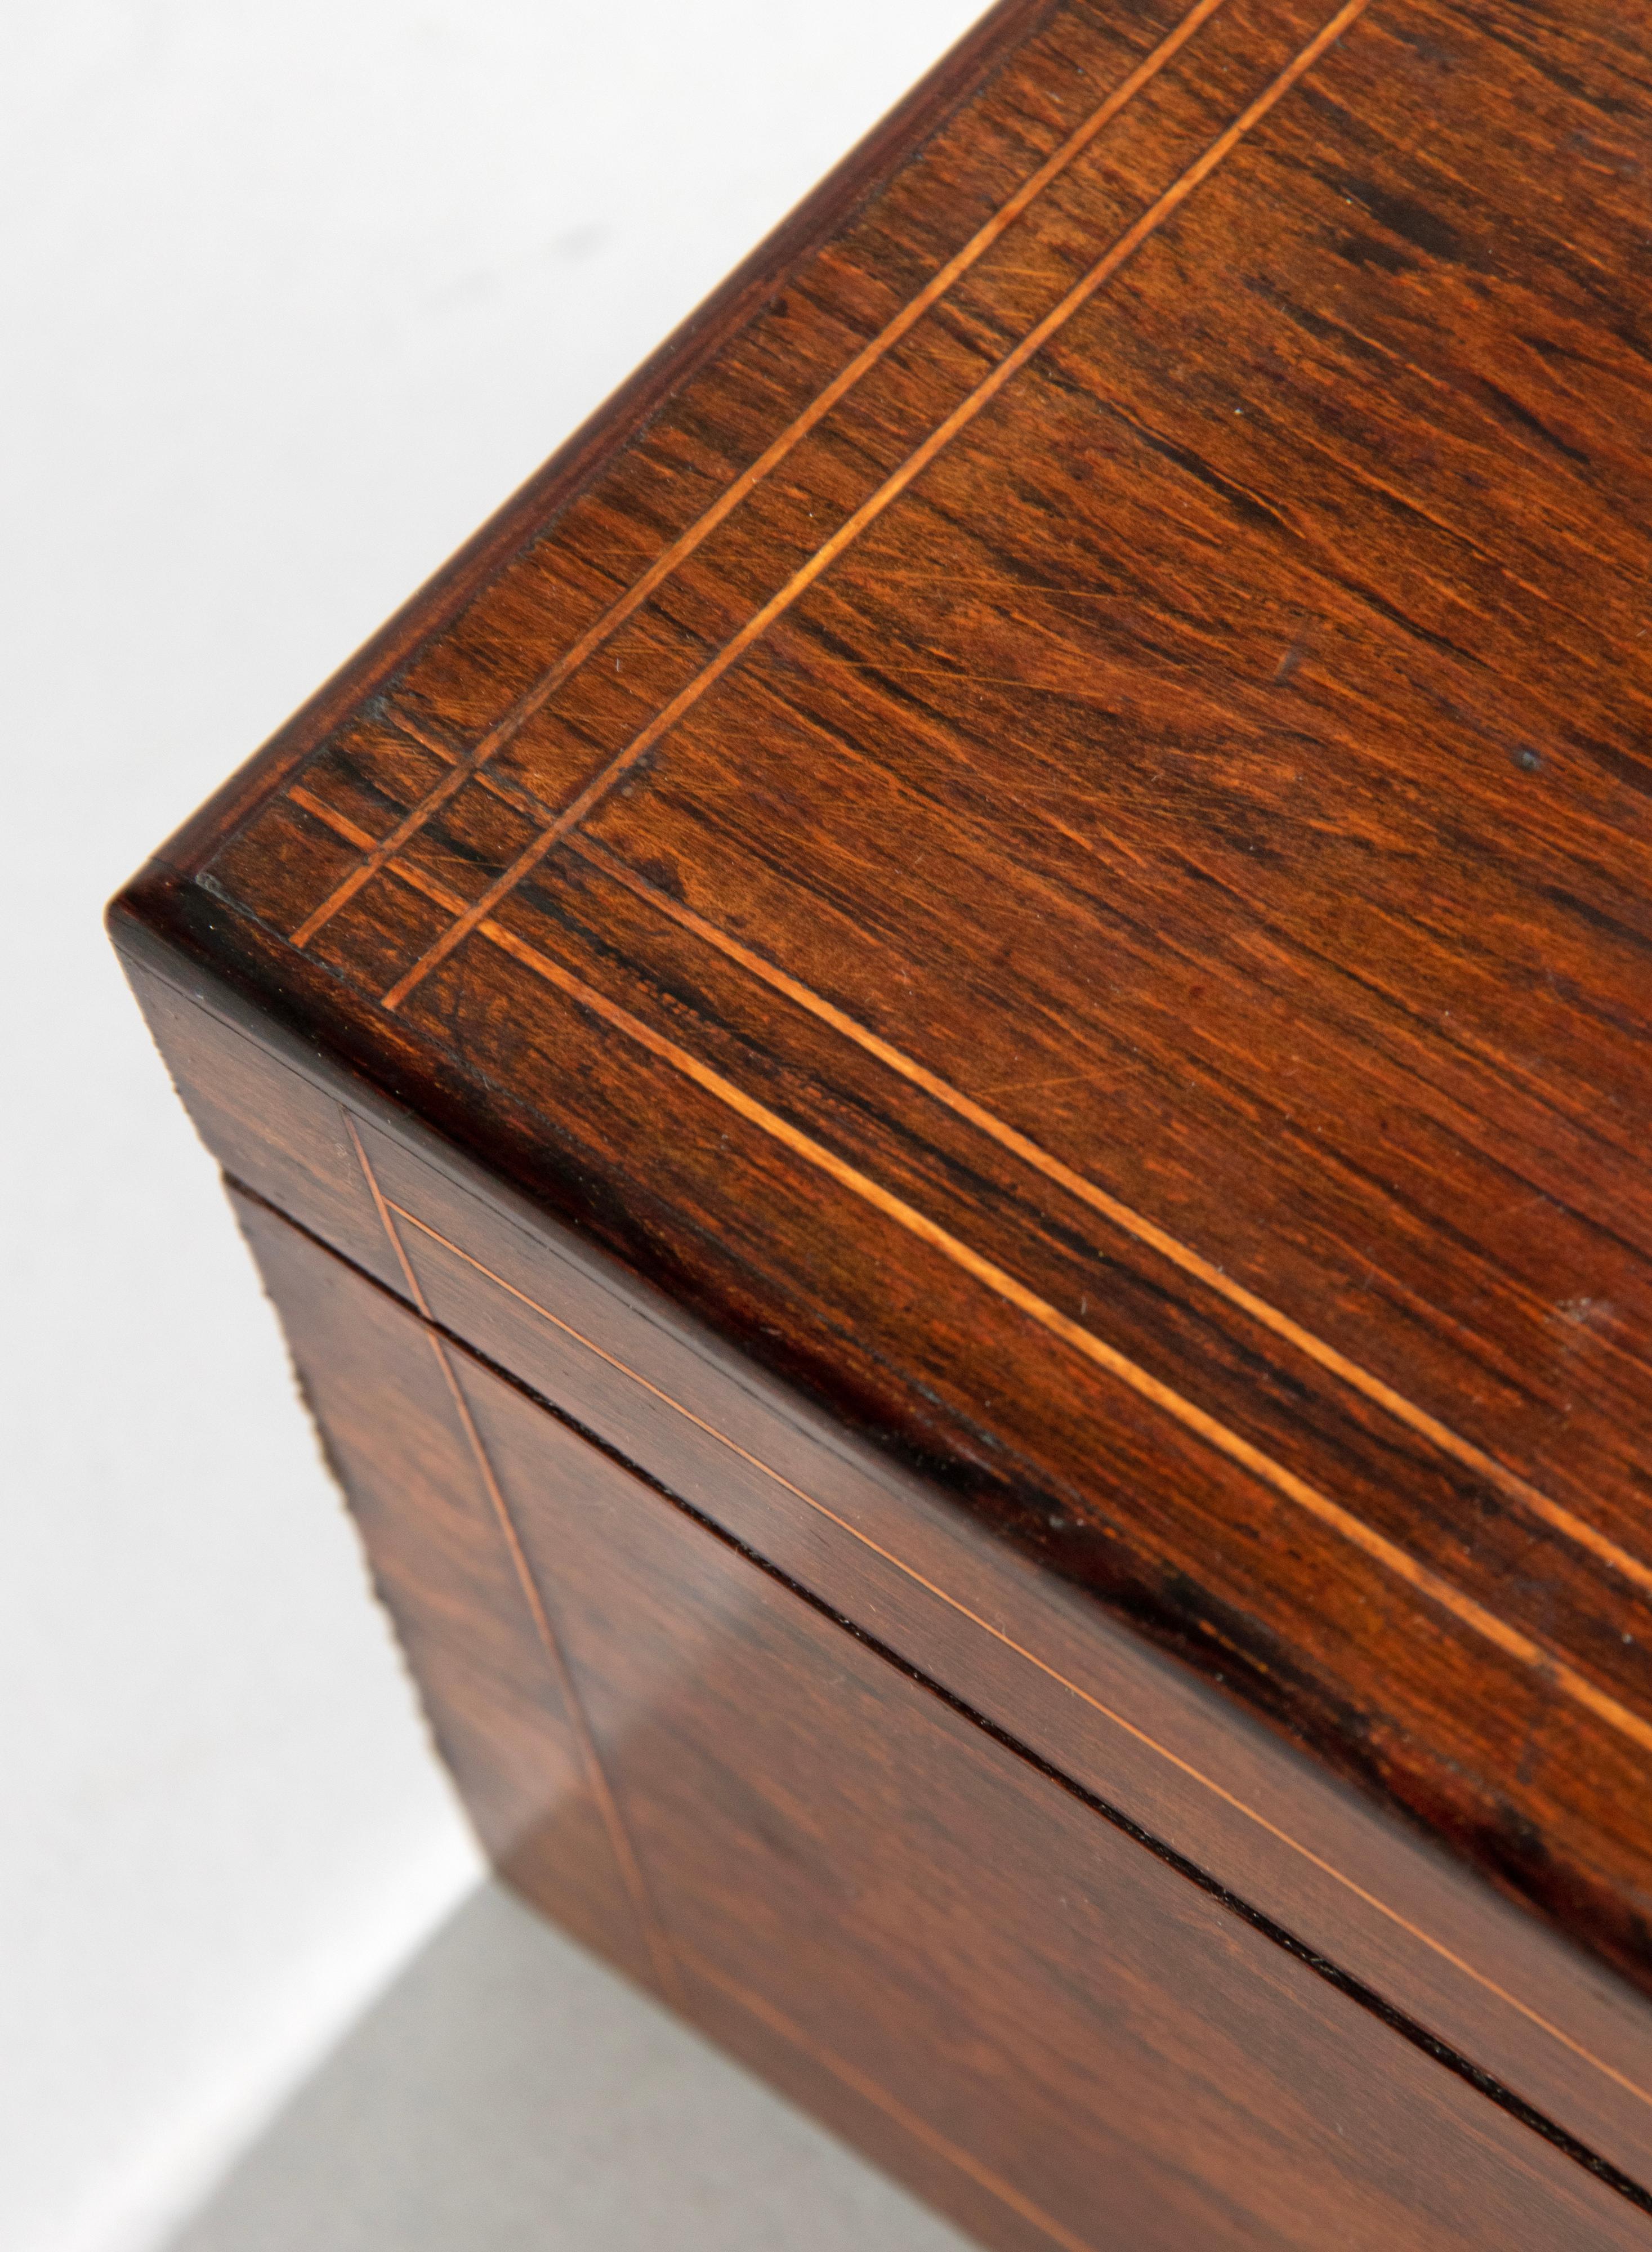 Late 19th Century French Wood Veneer Marquetry Tea Caddy For Sale 9